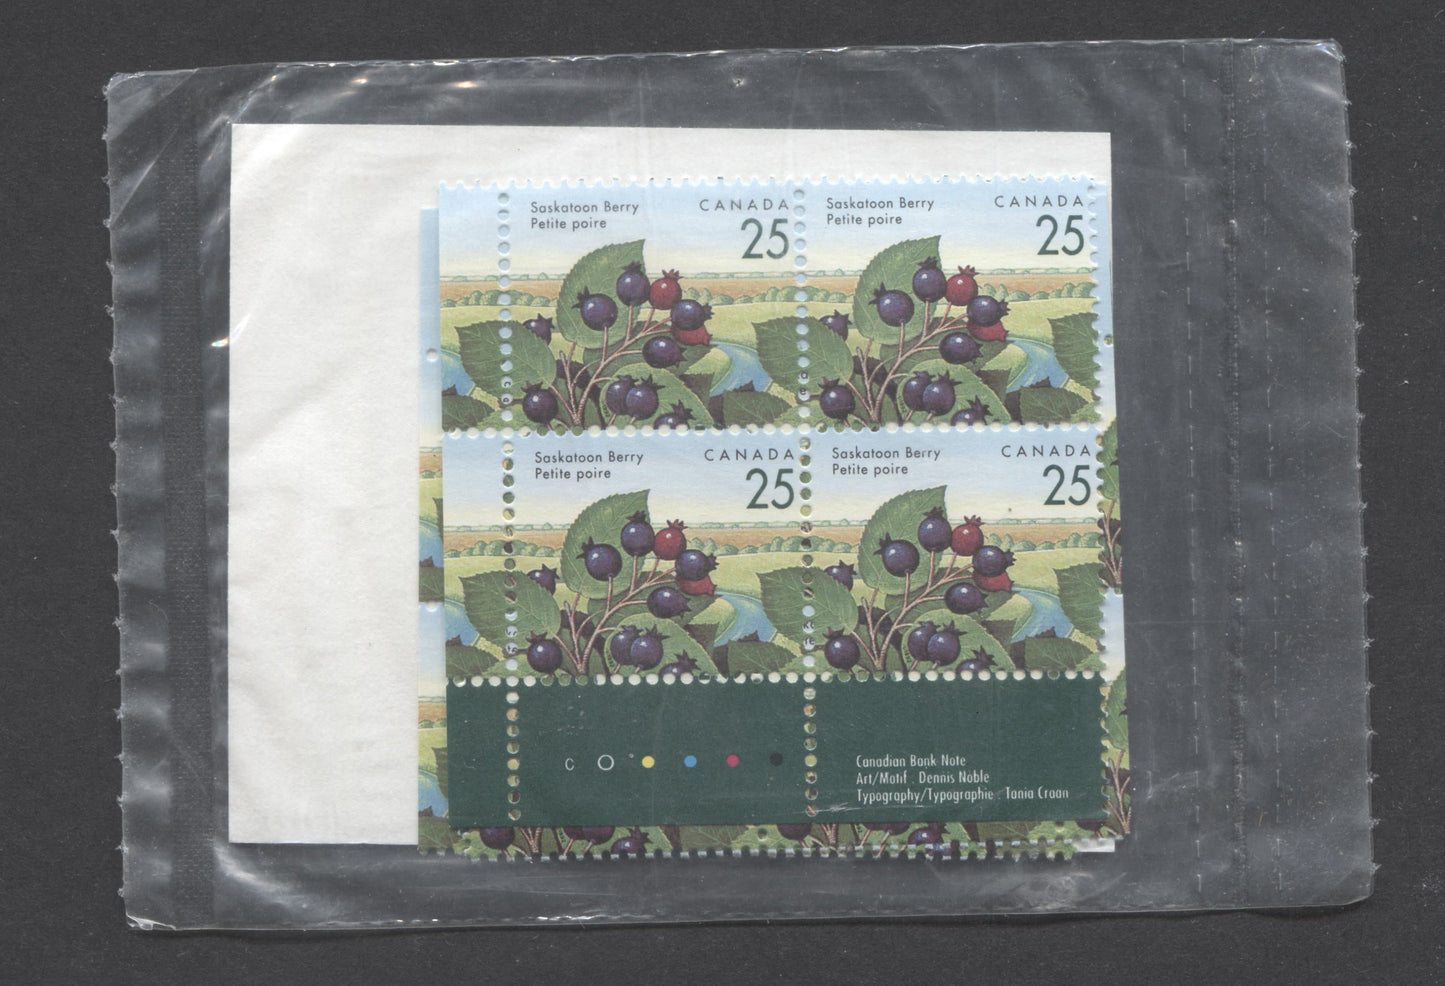 Lot 27 Canada #1355ii 25c Multicoloured 1992 - 1998 Edible Berries Definitive Issue, Canada Post Sealed Pack of Inscription Blocks, CBN Printing On DF CPP Paper, With HB Type 6A Insert Card, VFNH, Unitrade Cat. $17.5